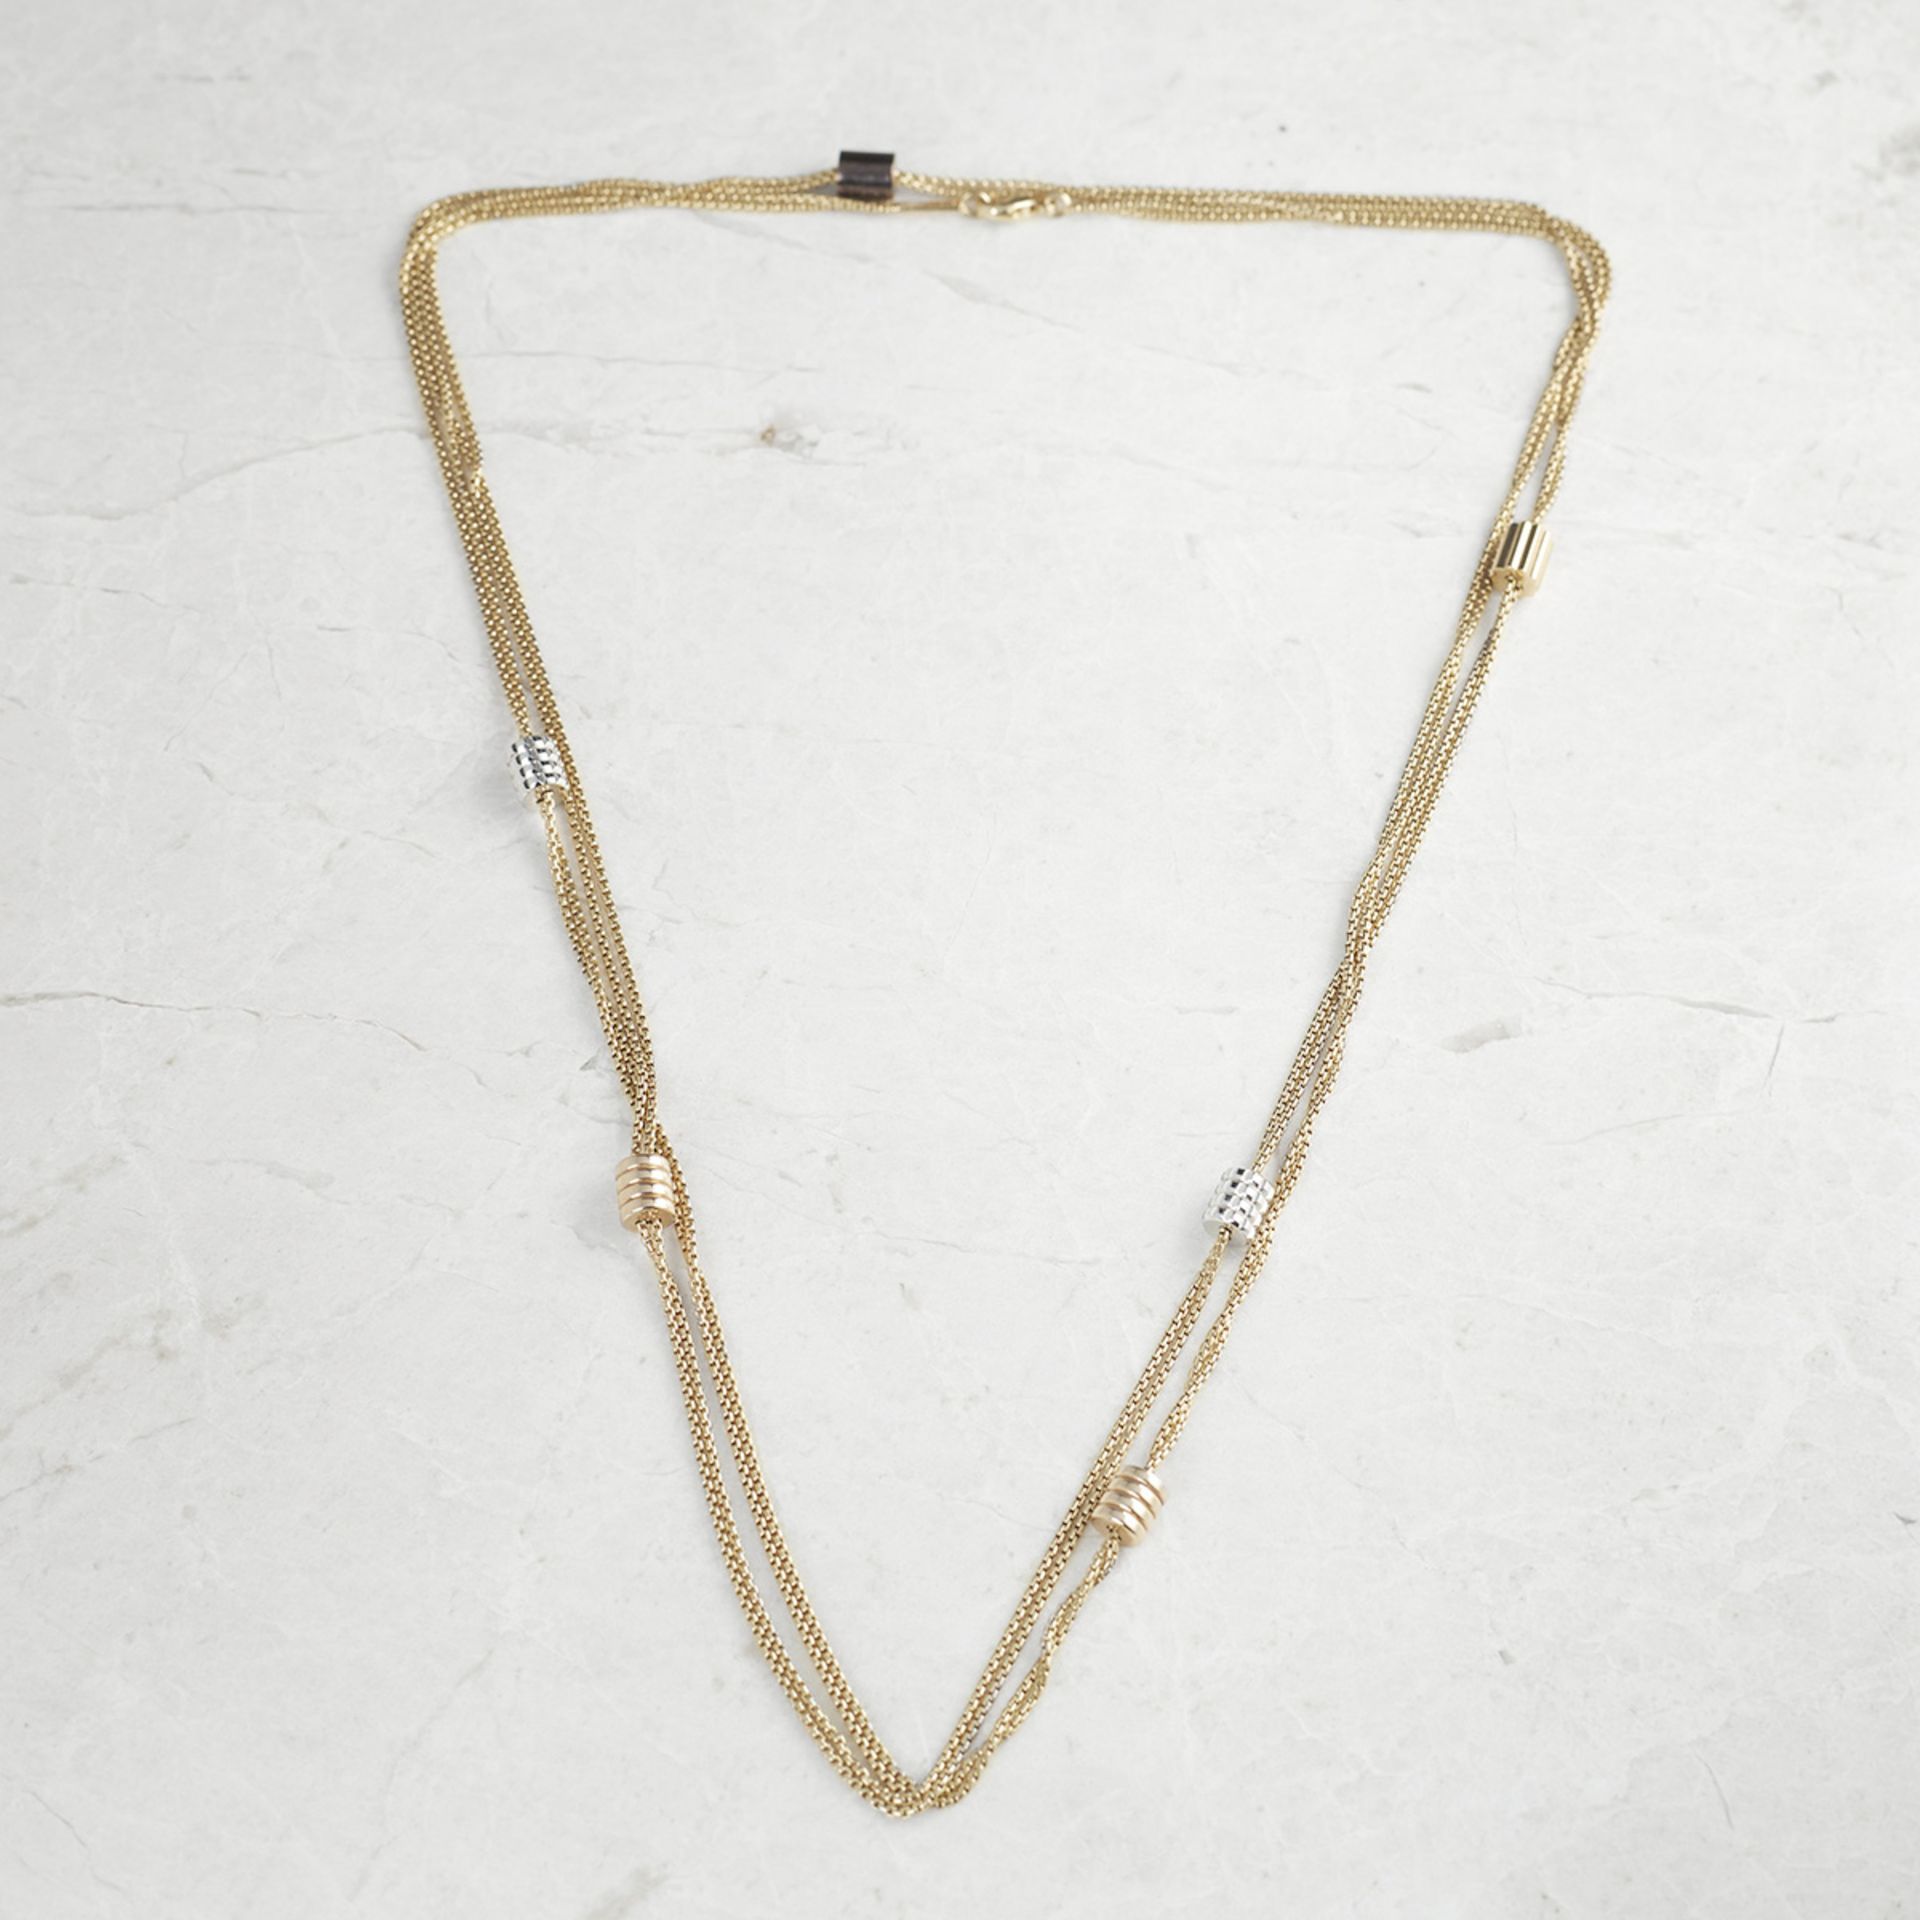 18k Yellow Gold Chain Necklace - Image 6 of 7